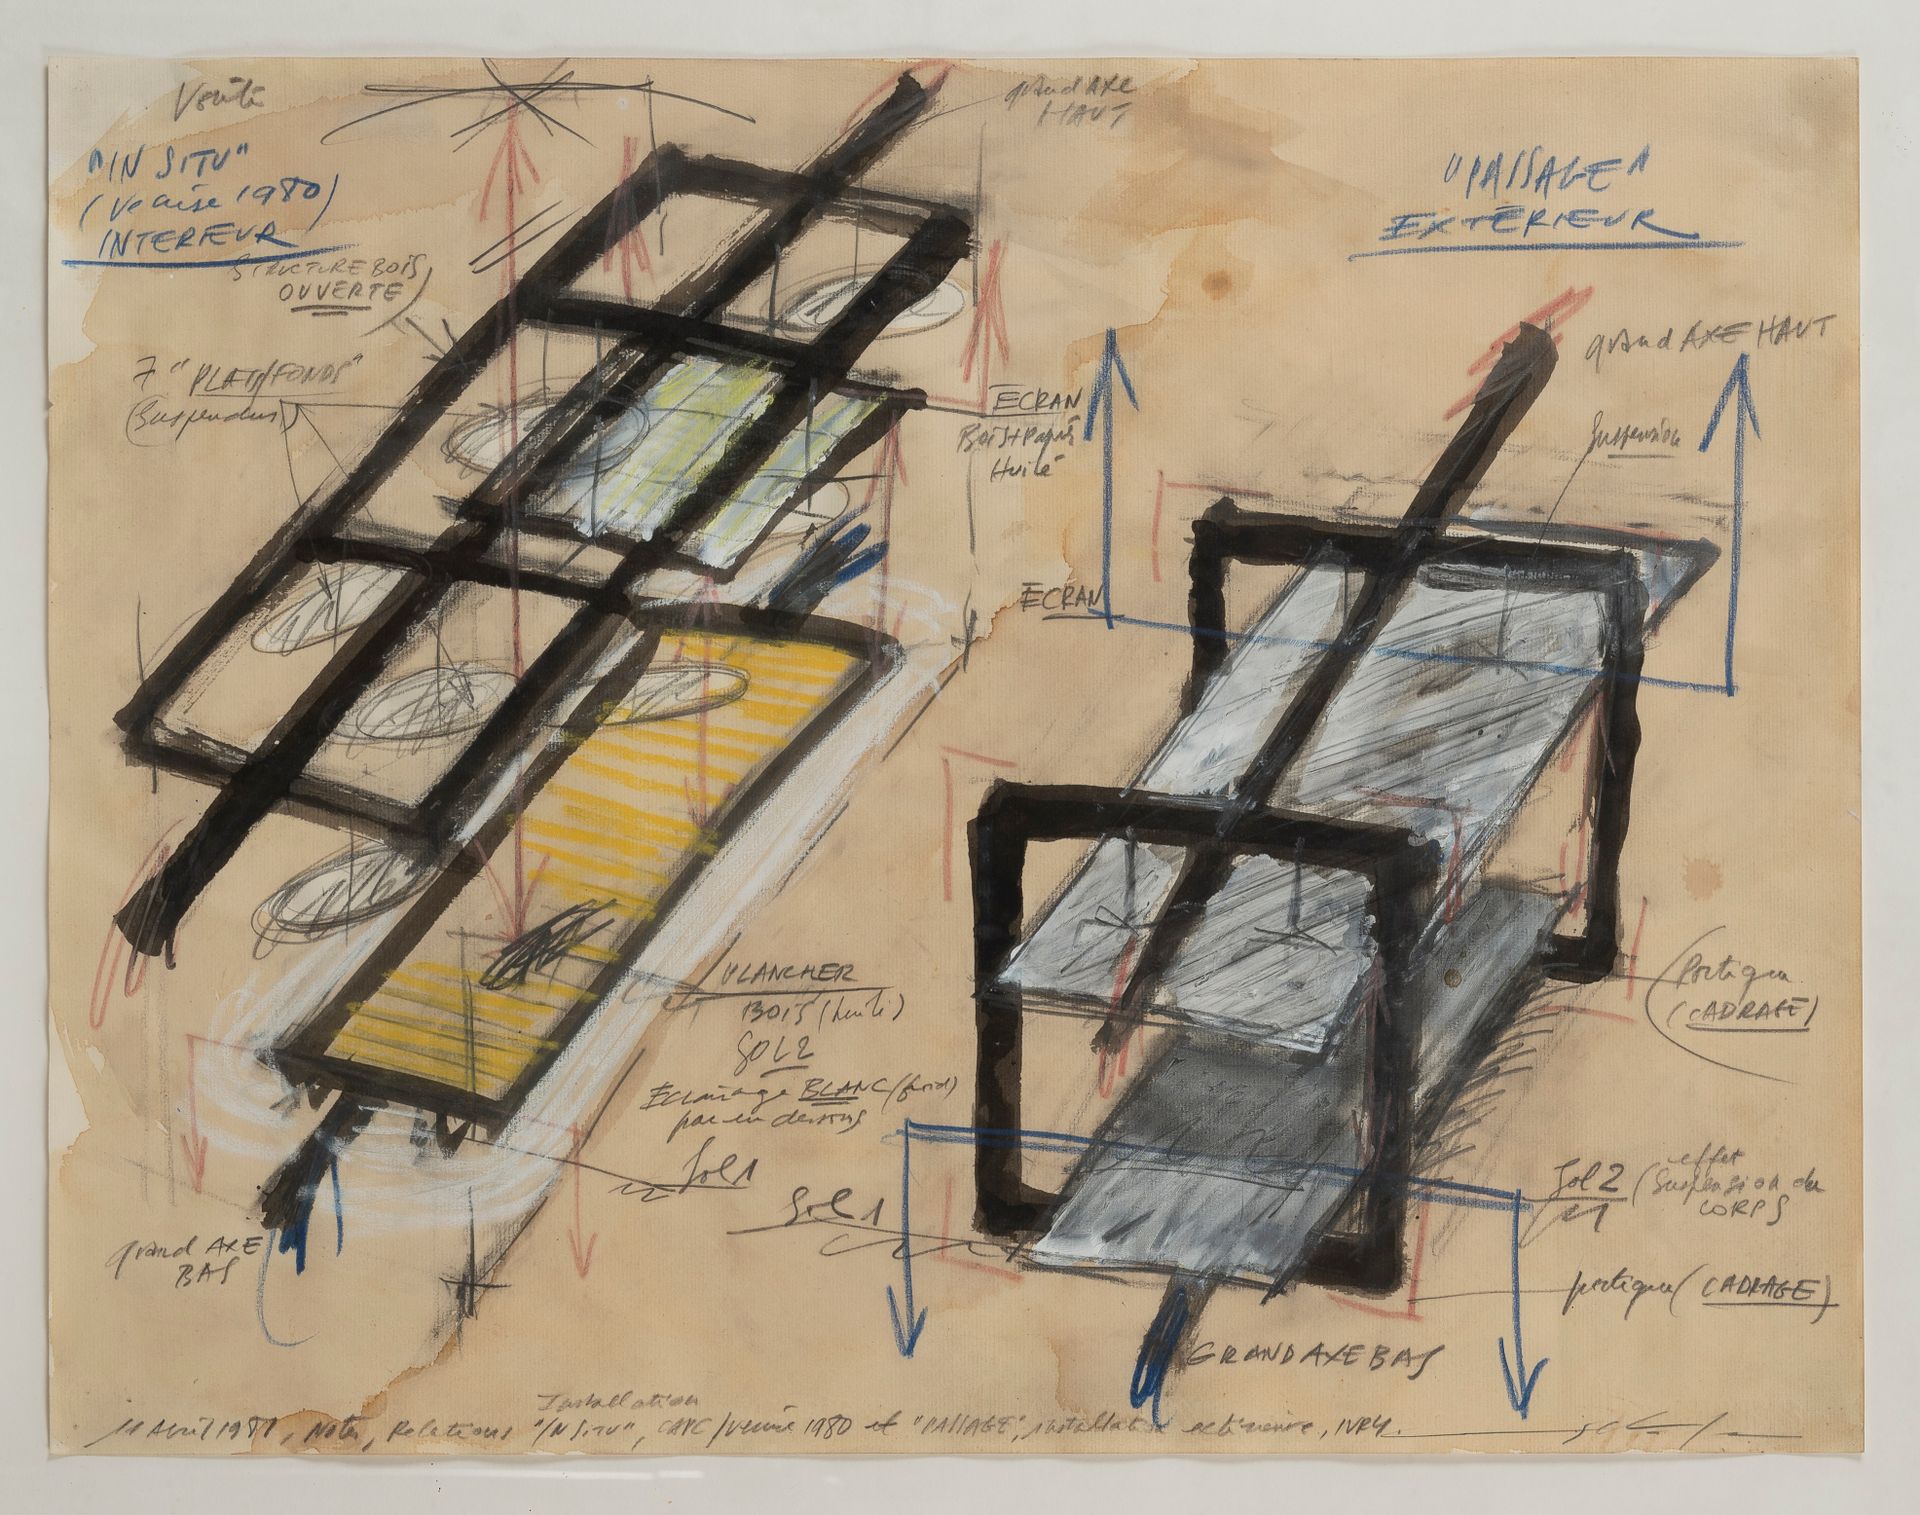 Null Jean CLAREBOUDT (1944-1977)

Project, April 11, 1981

Mixed media on paper &hellip;